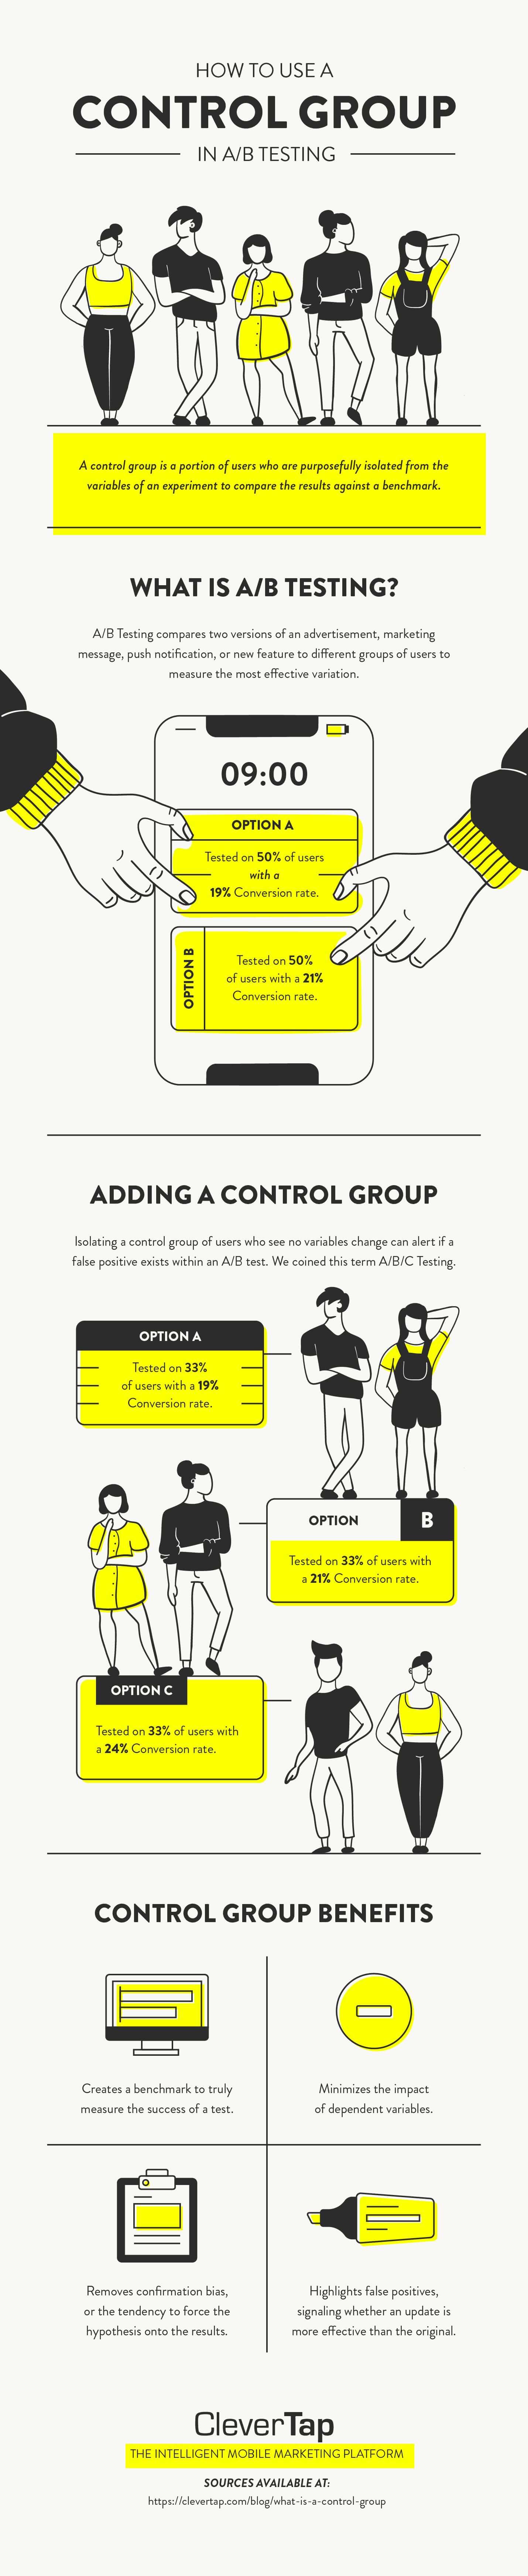 What is a control group in A/B Testing